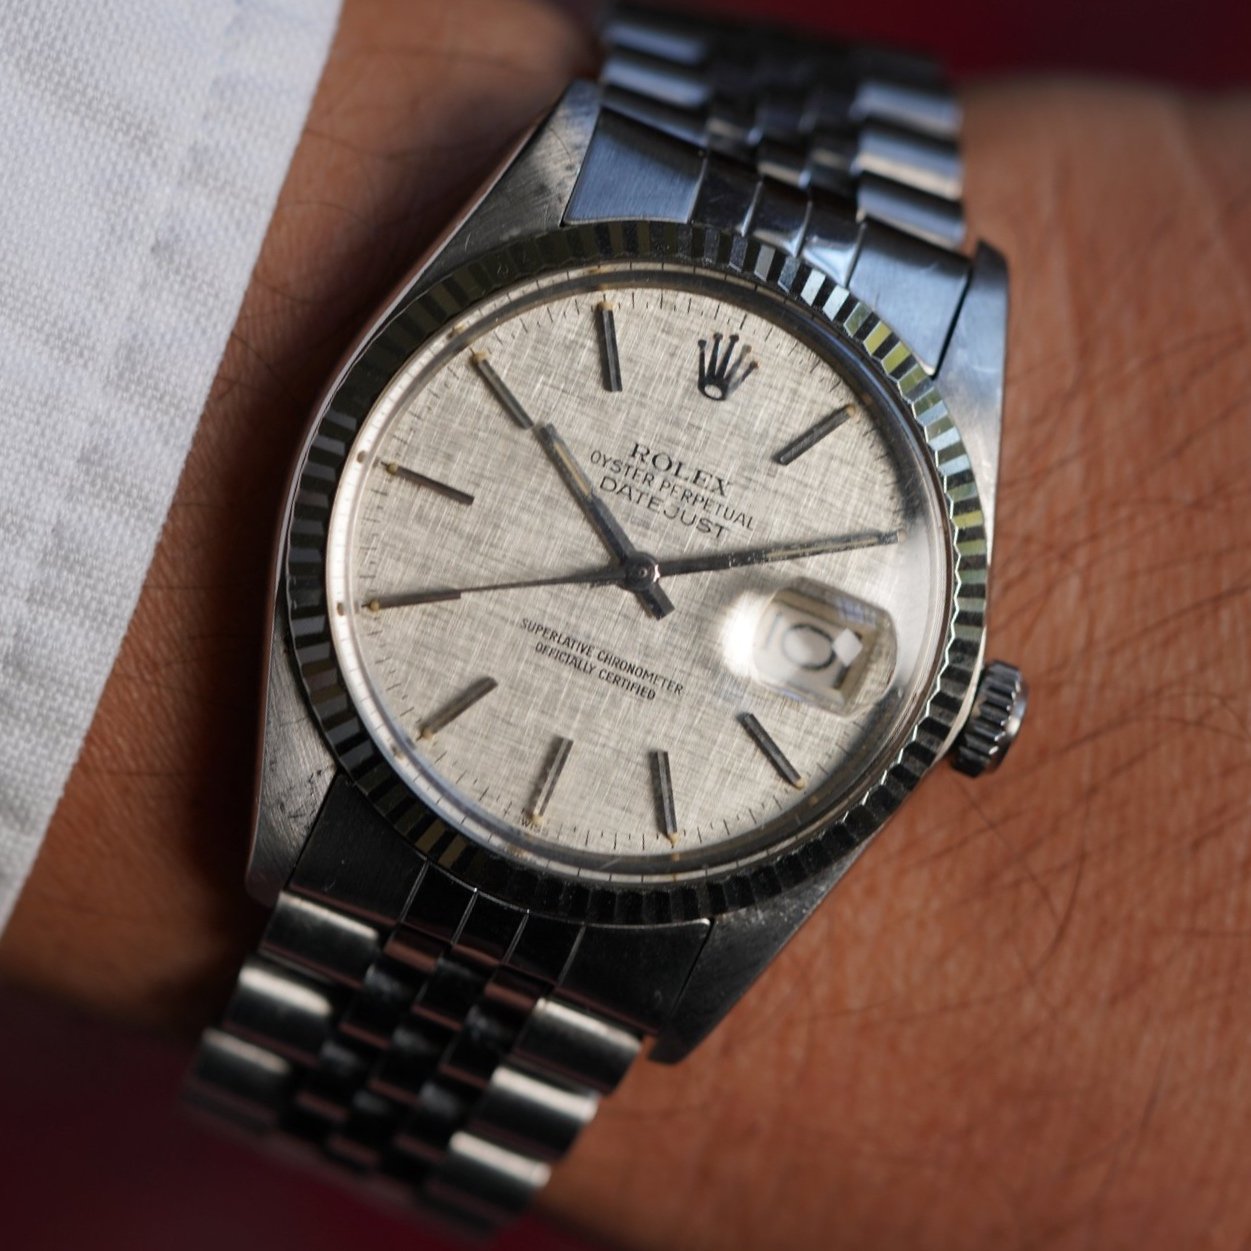 Rolex Linen Dial Datejust Reference 16014